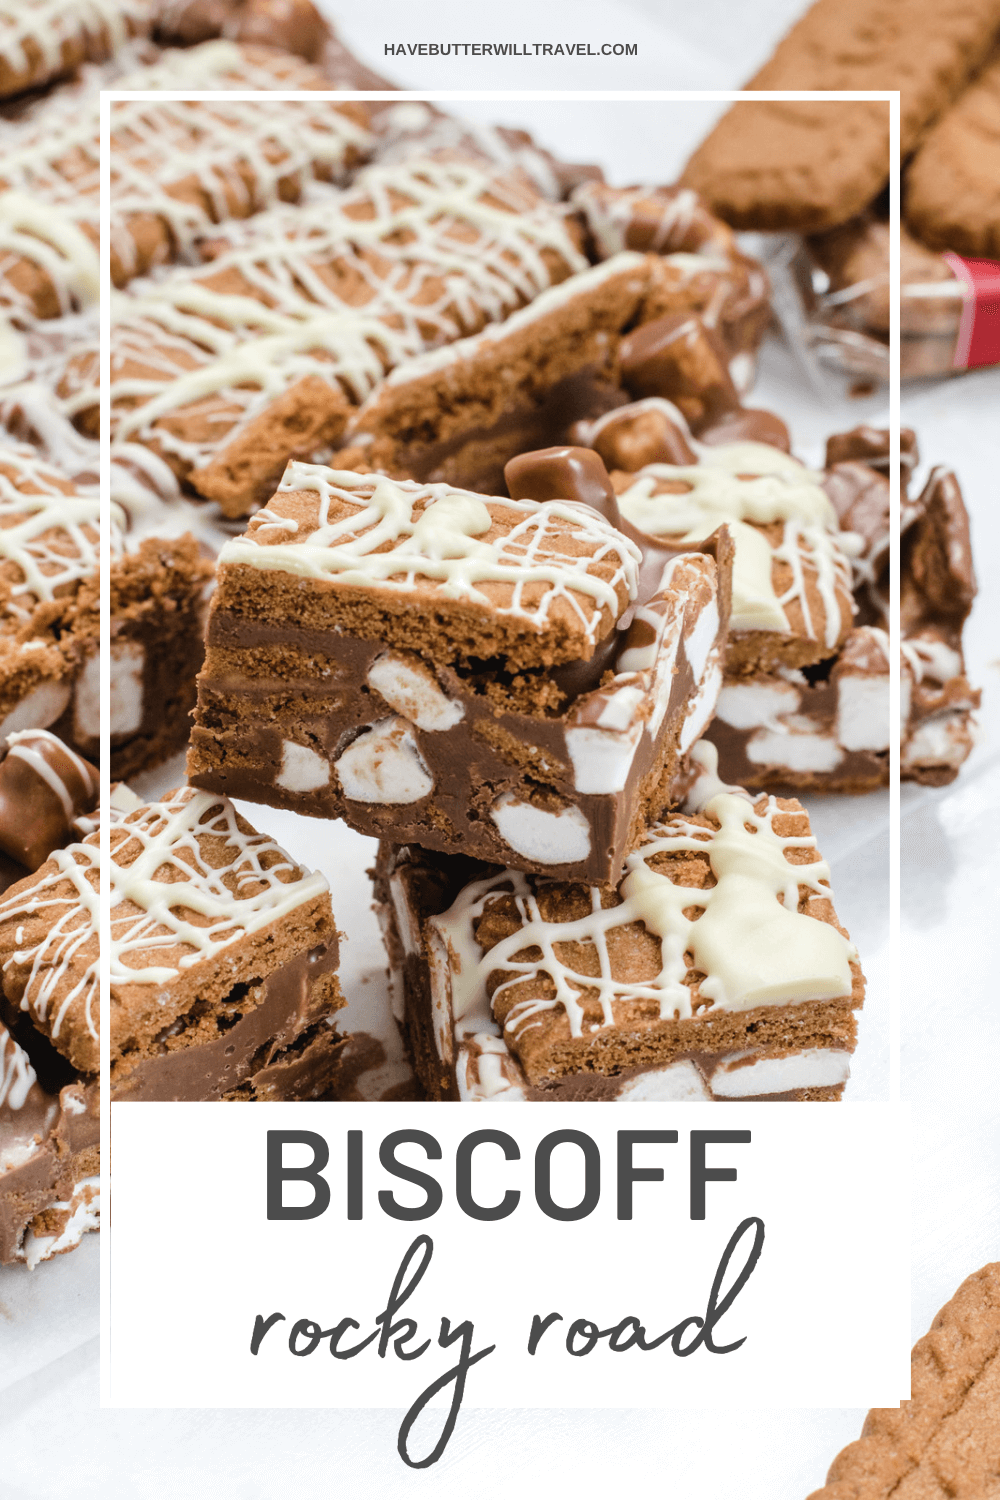 If you love anything Biscoff then this Biscoff Rocky Road is the recipe for you! Simple to make but an absolute crowd pleaser. #biscoff